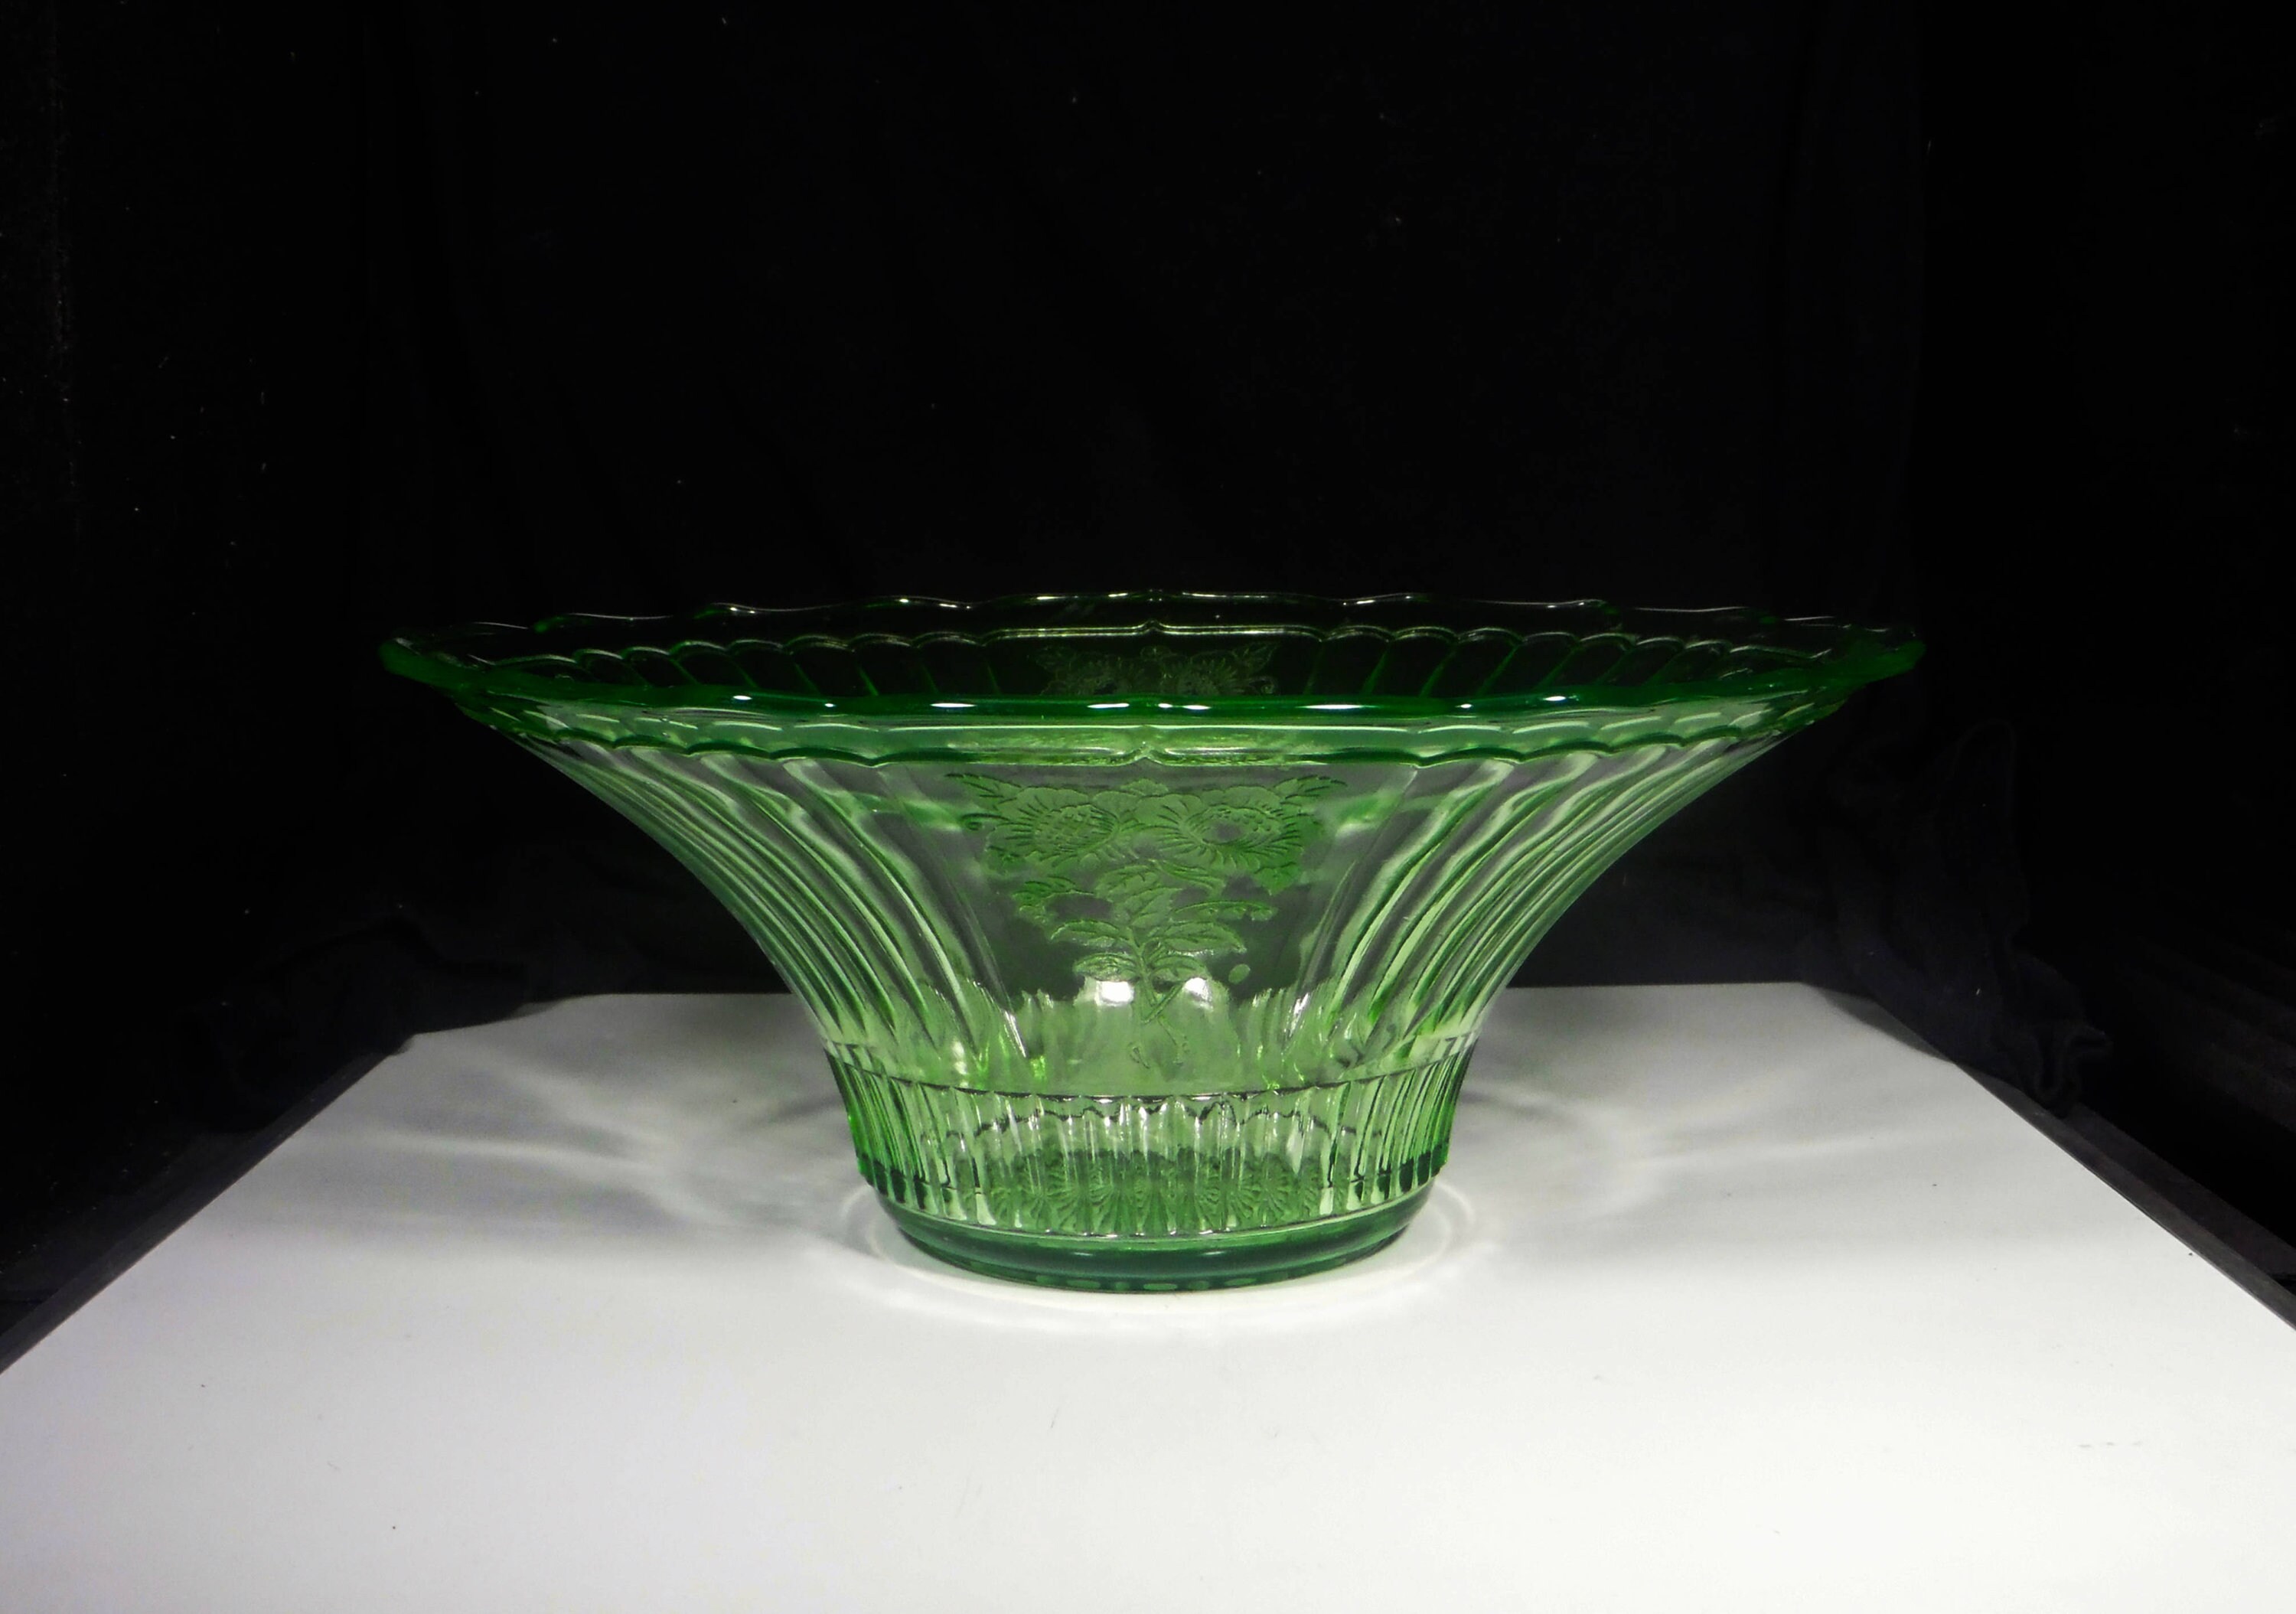 Vintage Green Depression Glass Mixing/Batter Bowl with Lid…